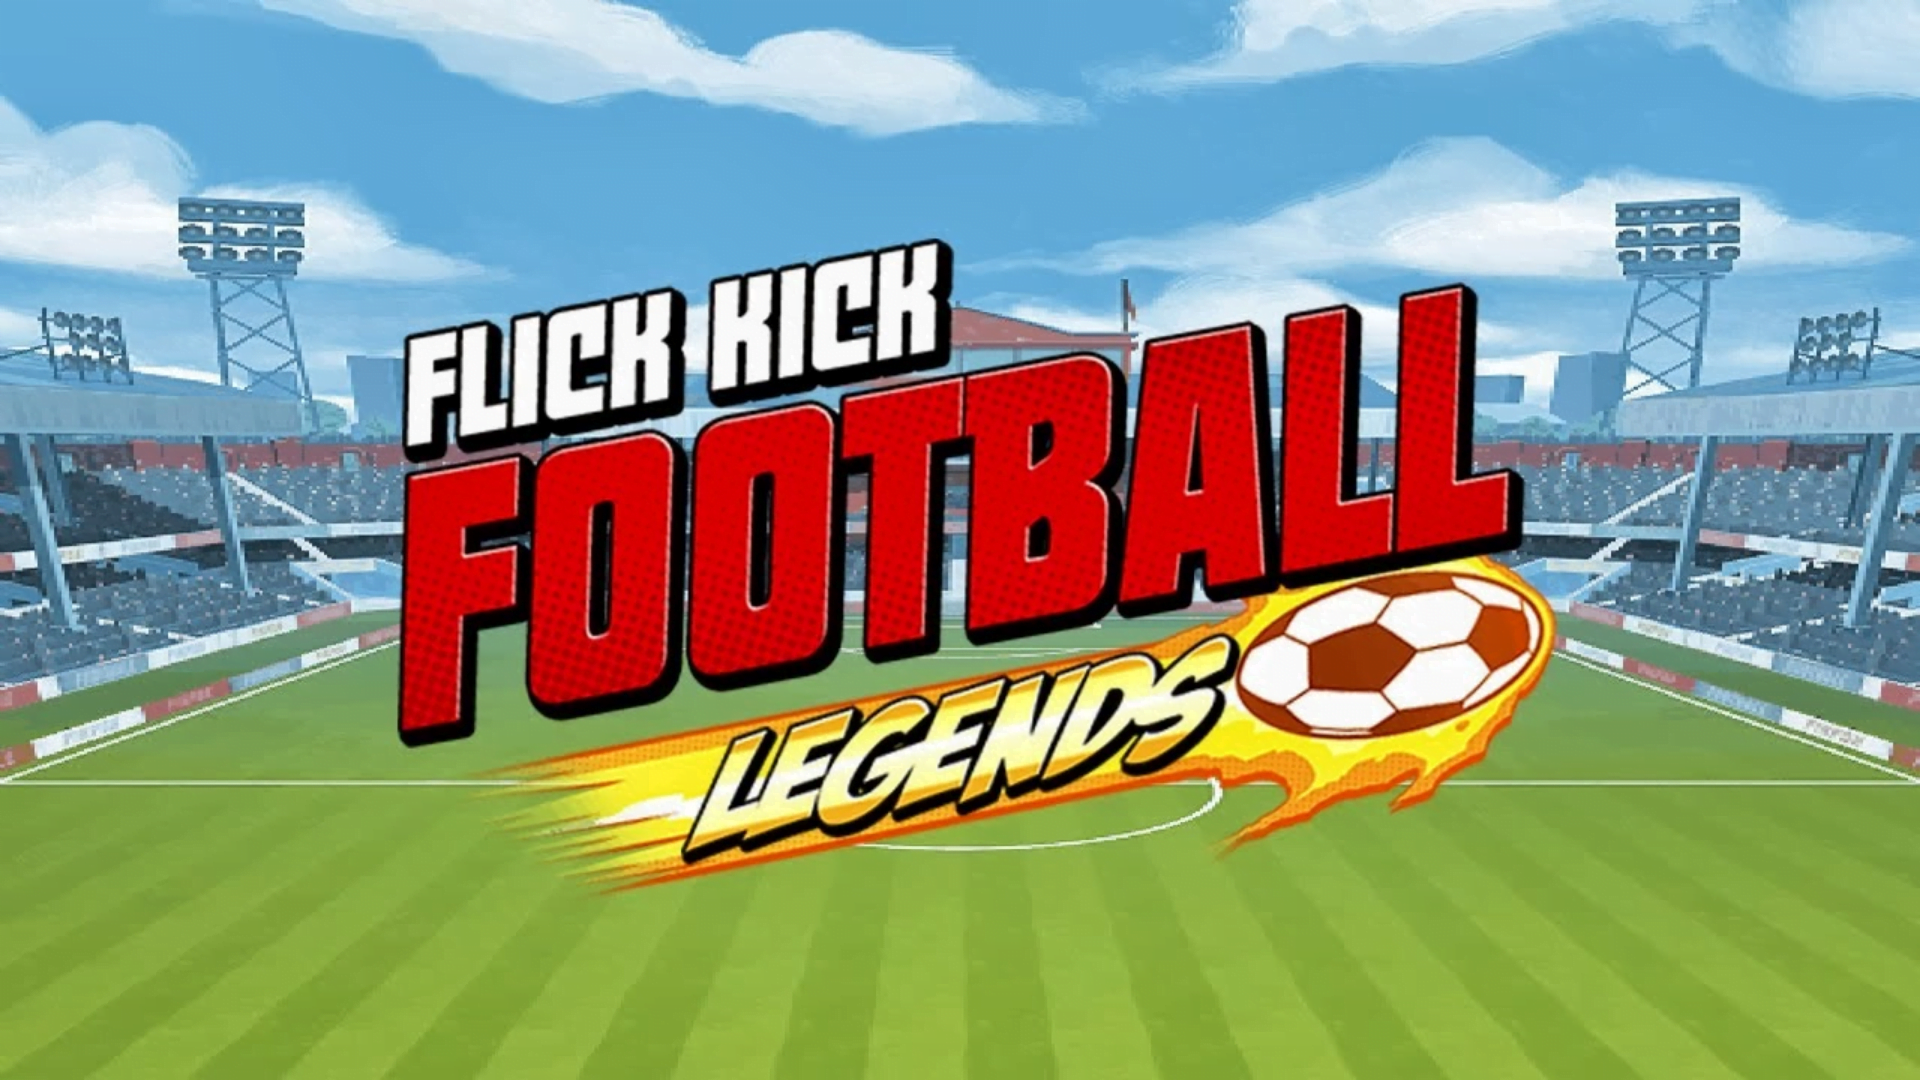 Download Game Flick Kick Football Legends Kasual di Android